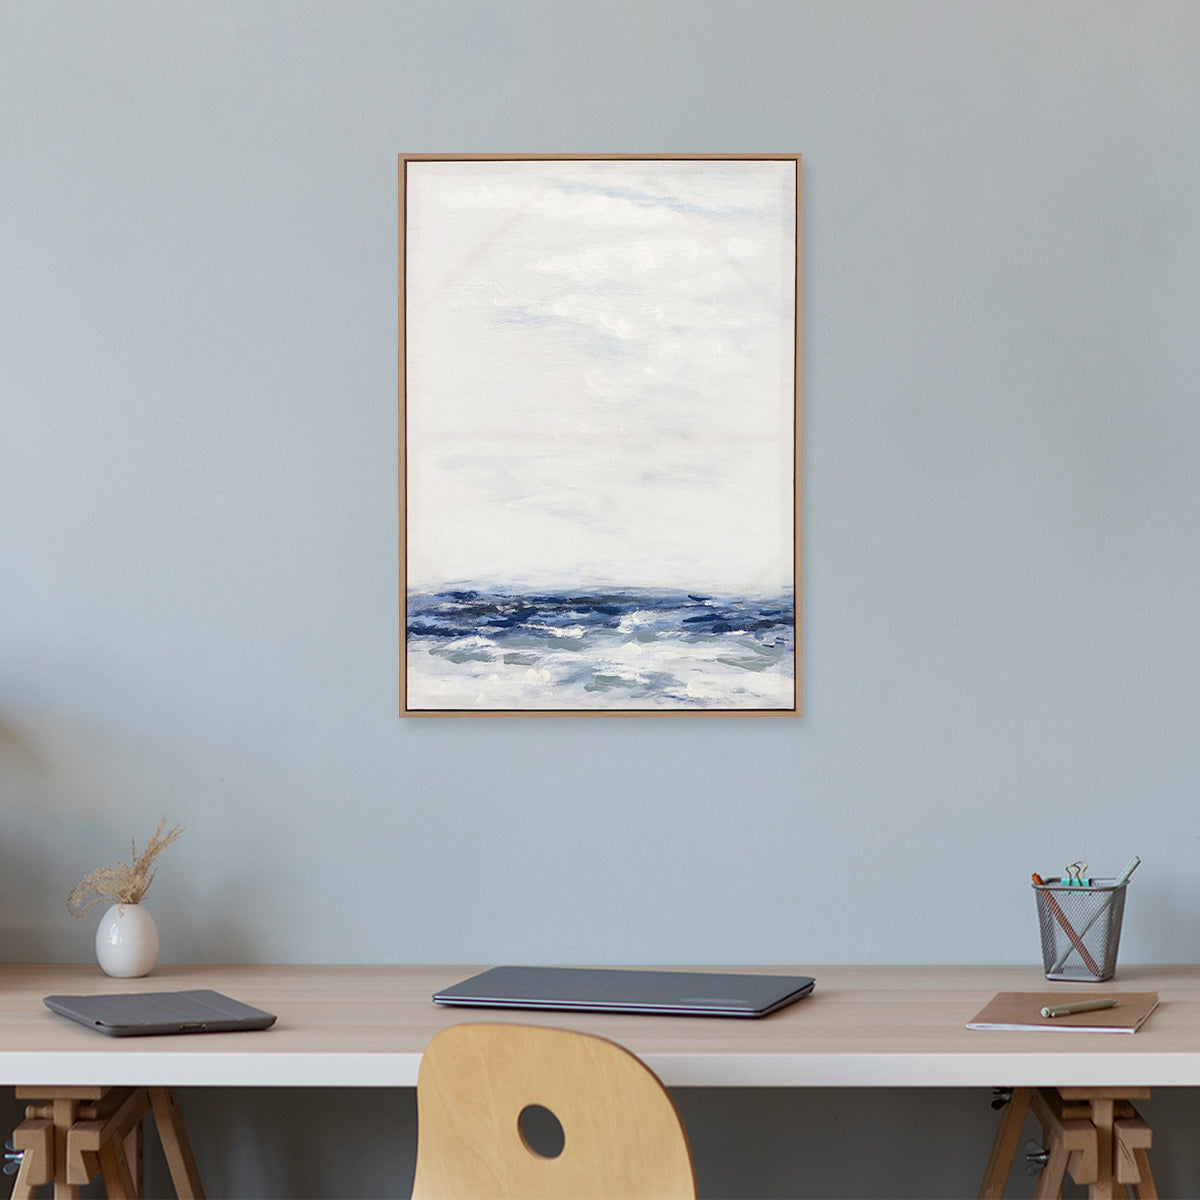 Abstract textured wall art affordable oil painting framed white and blue sea portrait in study room office